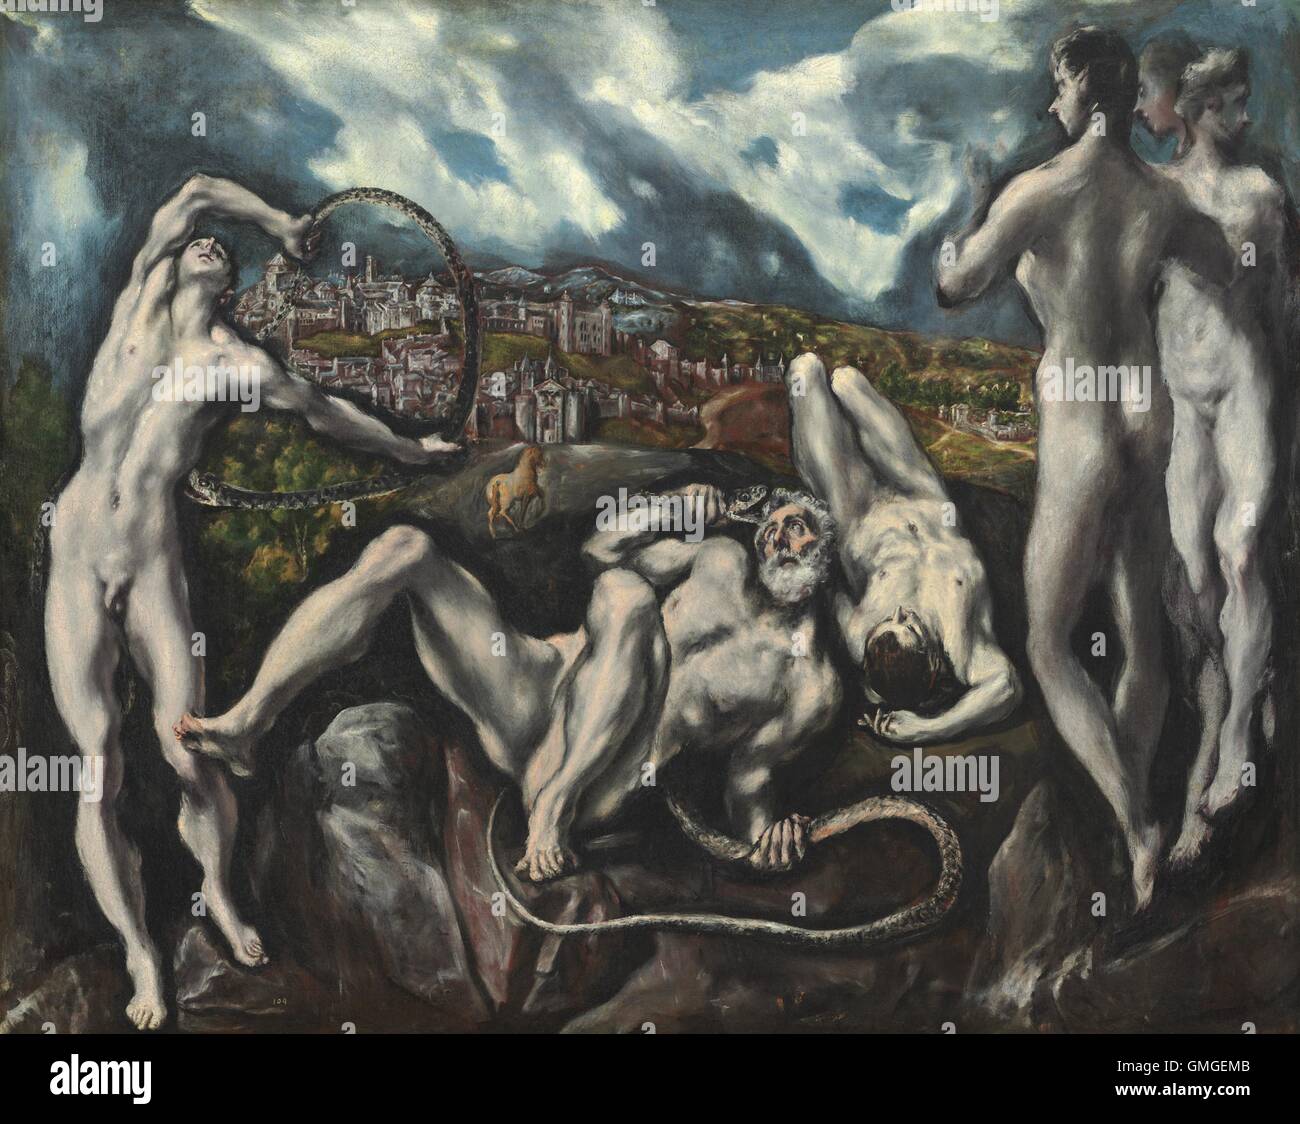 Laocoon, by El Greco, 1610-14, Greek/Spanish painting, oil on canvas. Laocoon, a Trojan priest and his two sons are attacked by Stock Photo